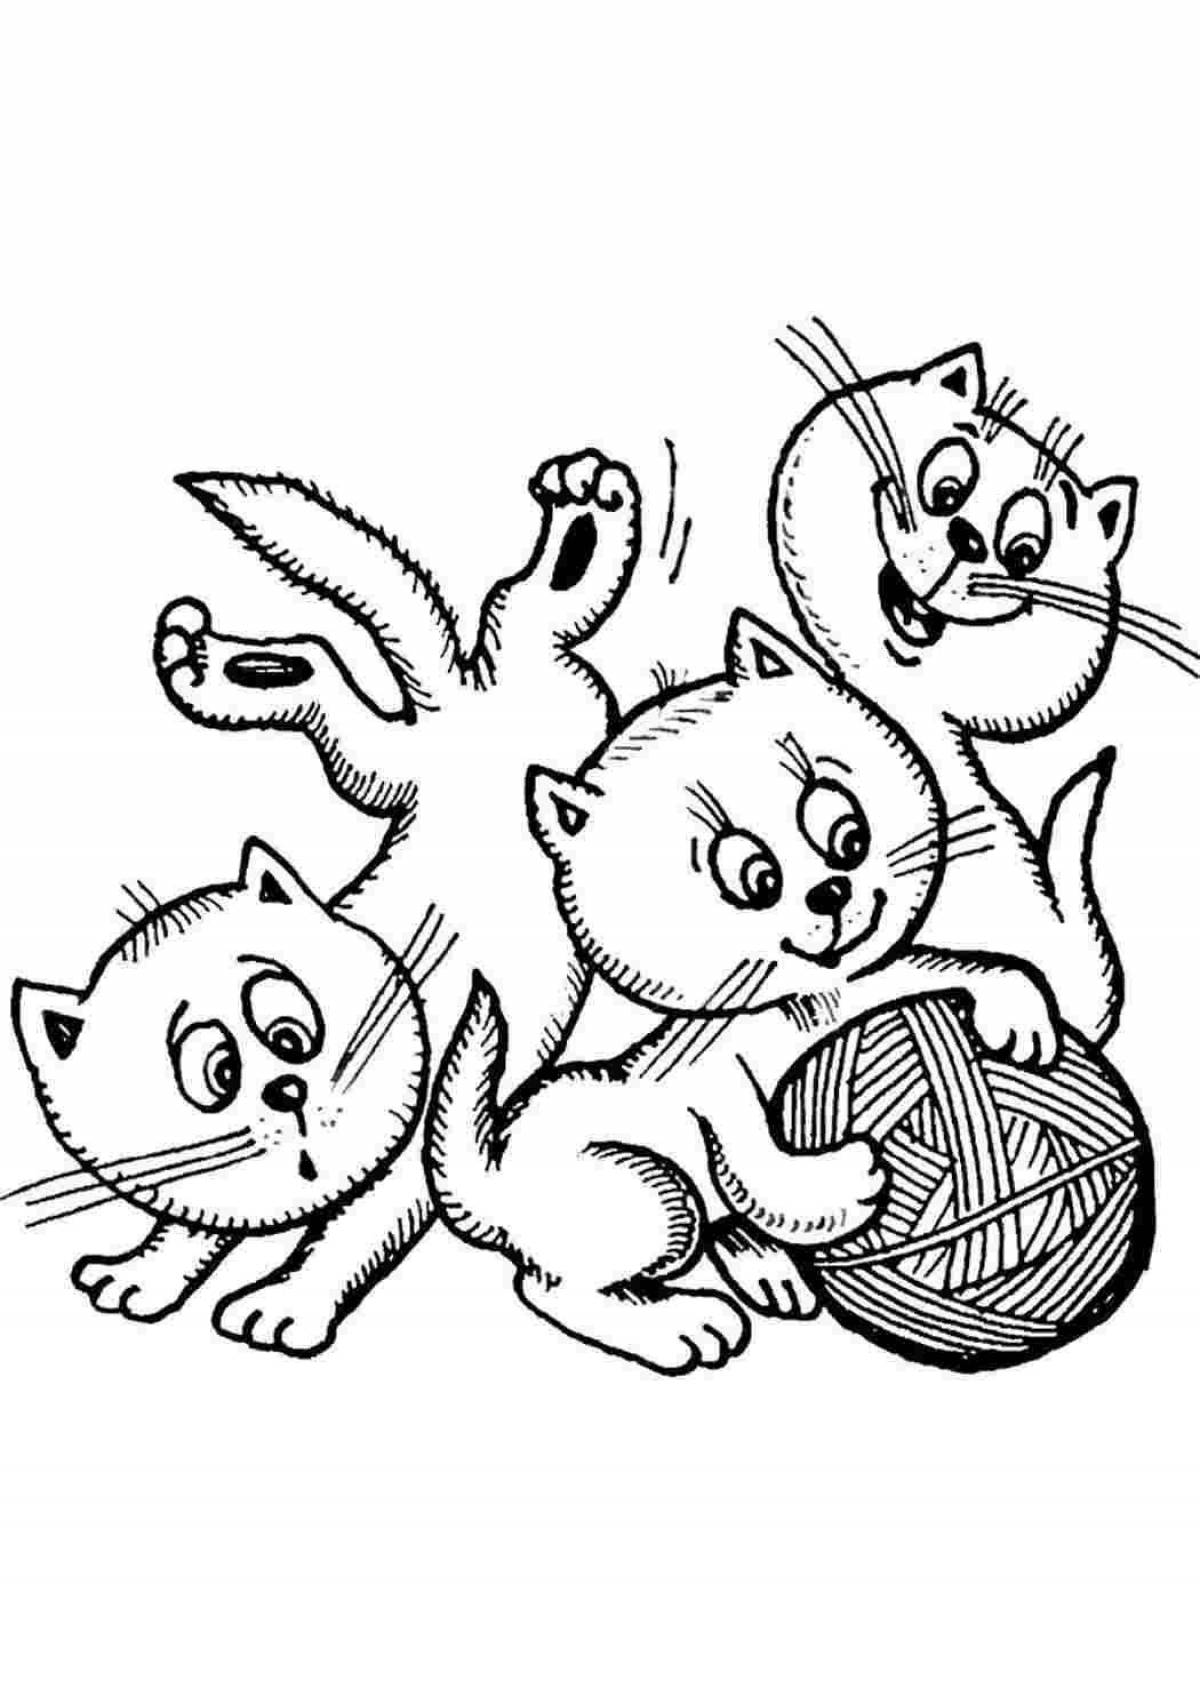 Coloring page wild cat with a ball